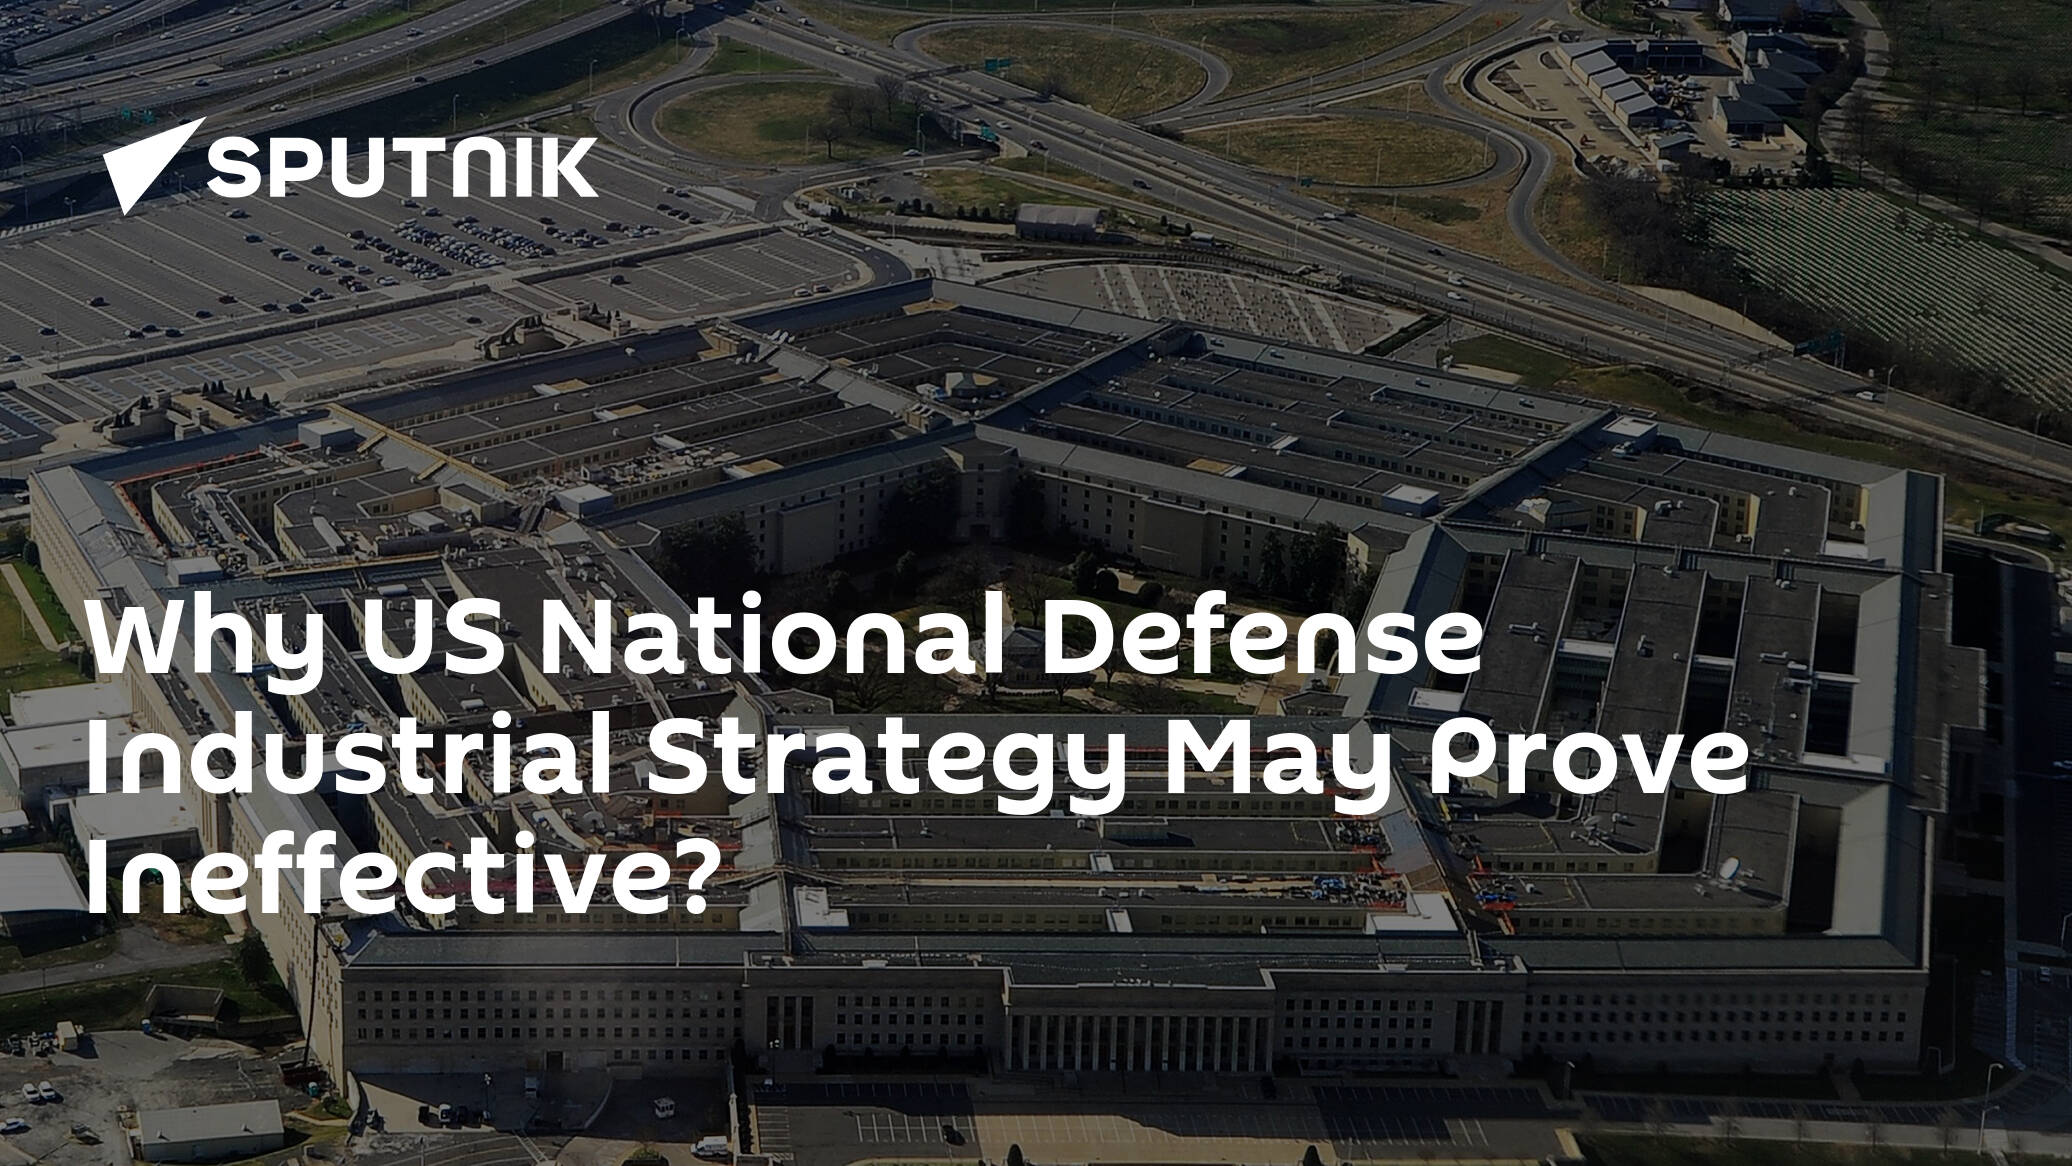 US’ National Defense Industrial Strategy May Prove Ineffective – Expert